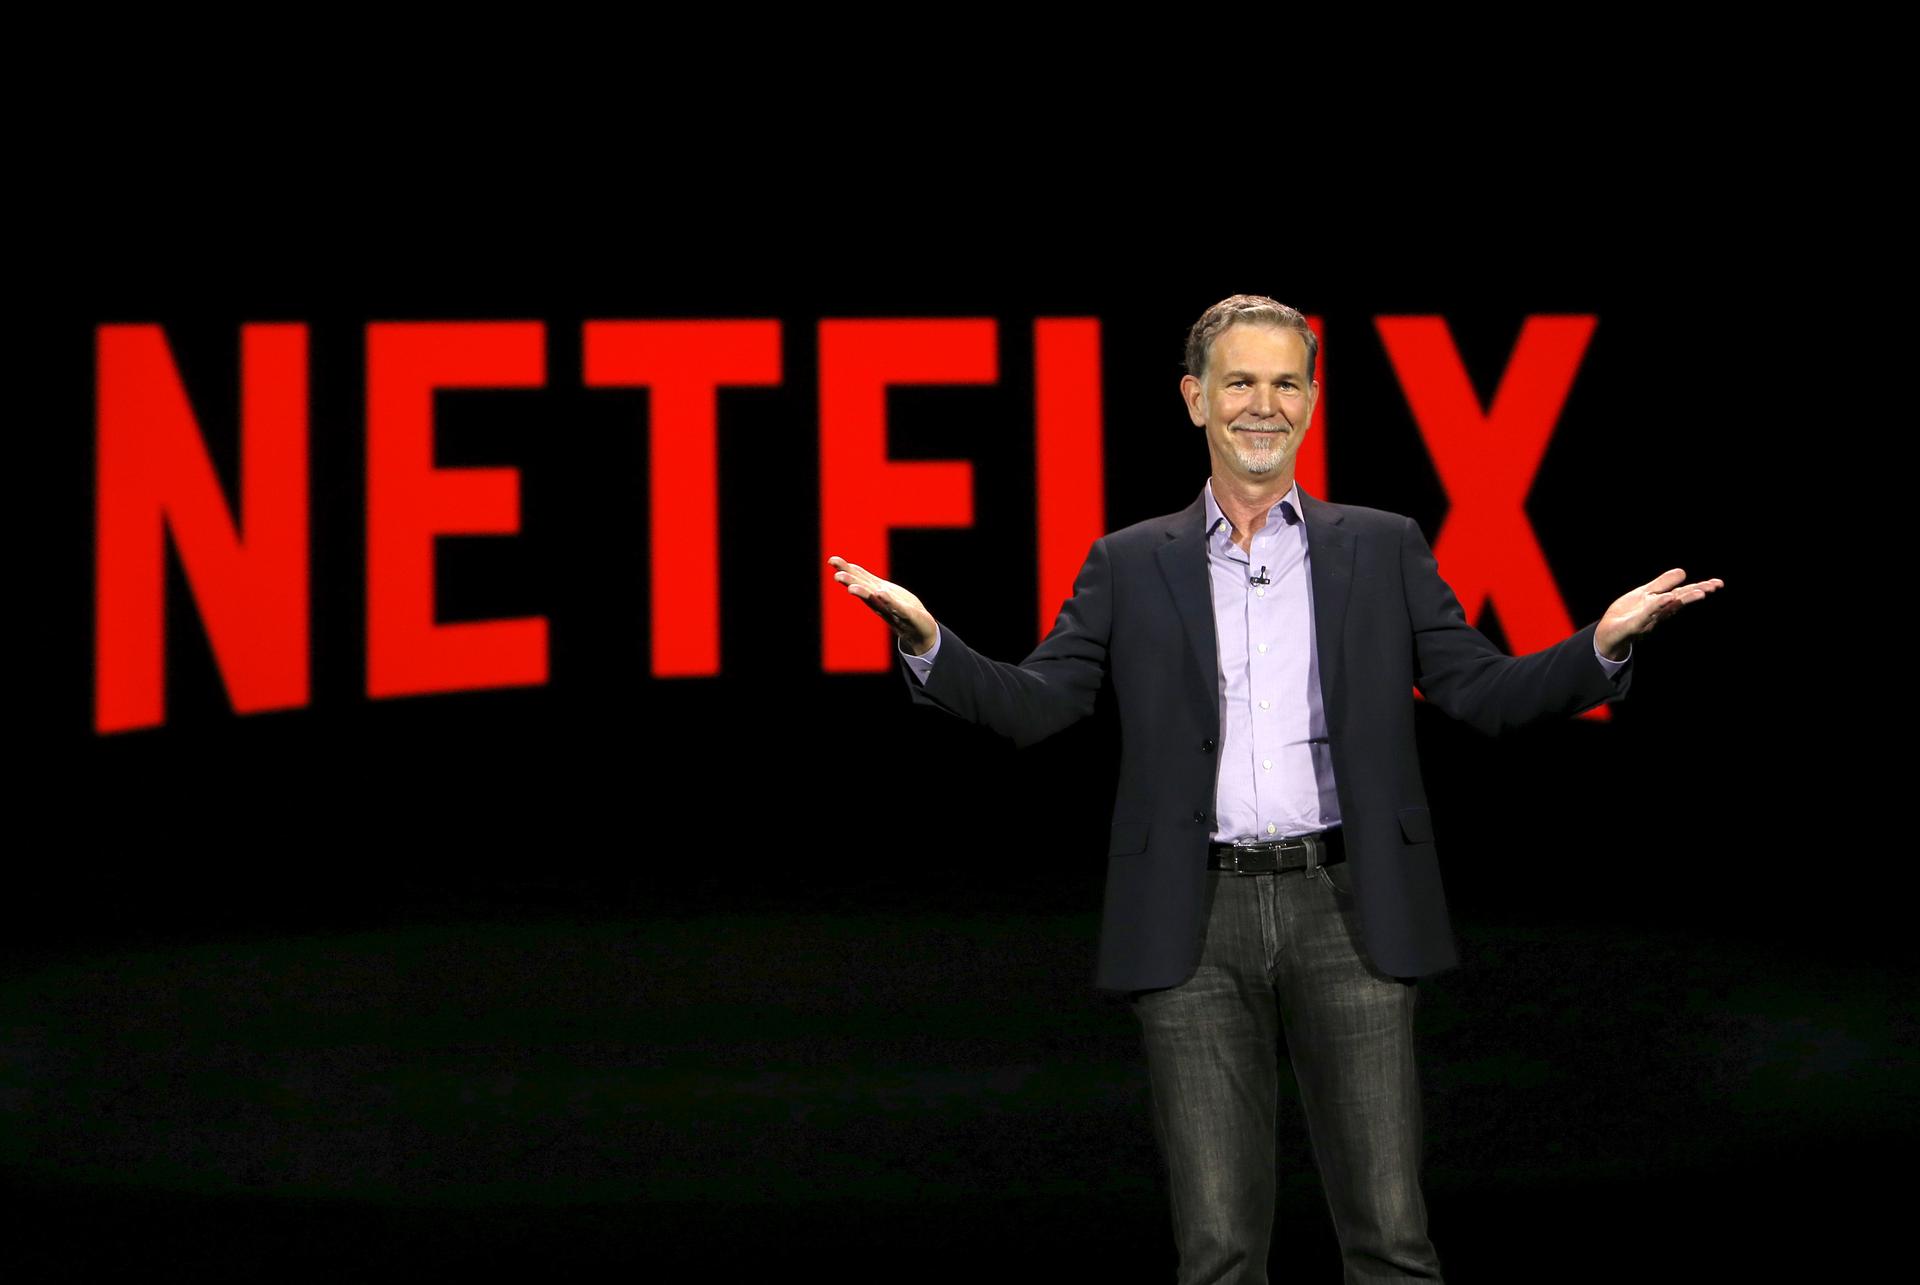 Reed Hastings, co-founder and CEO of Netflix spent two years in Swaziland teaching English.